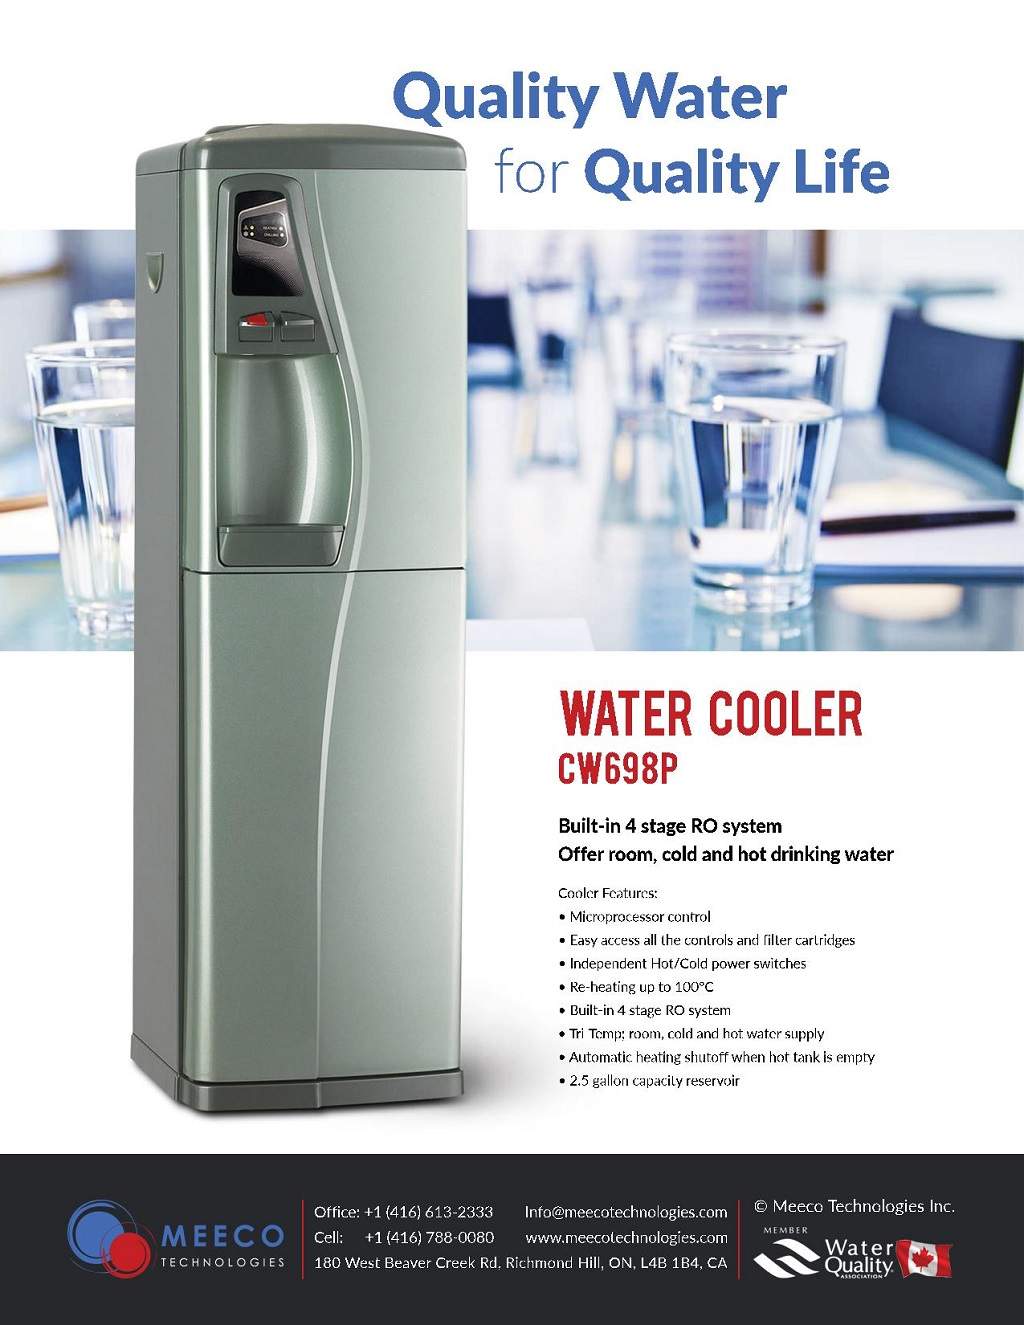 MeecoTechnologies® Water Cooler CW698, Built-in 4 stage RO system Offer room, cold and hot drinking water.